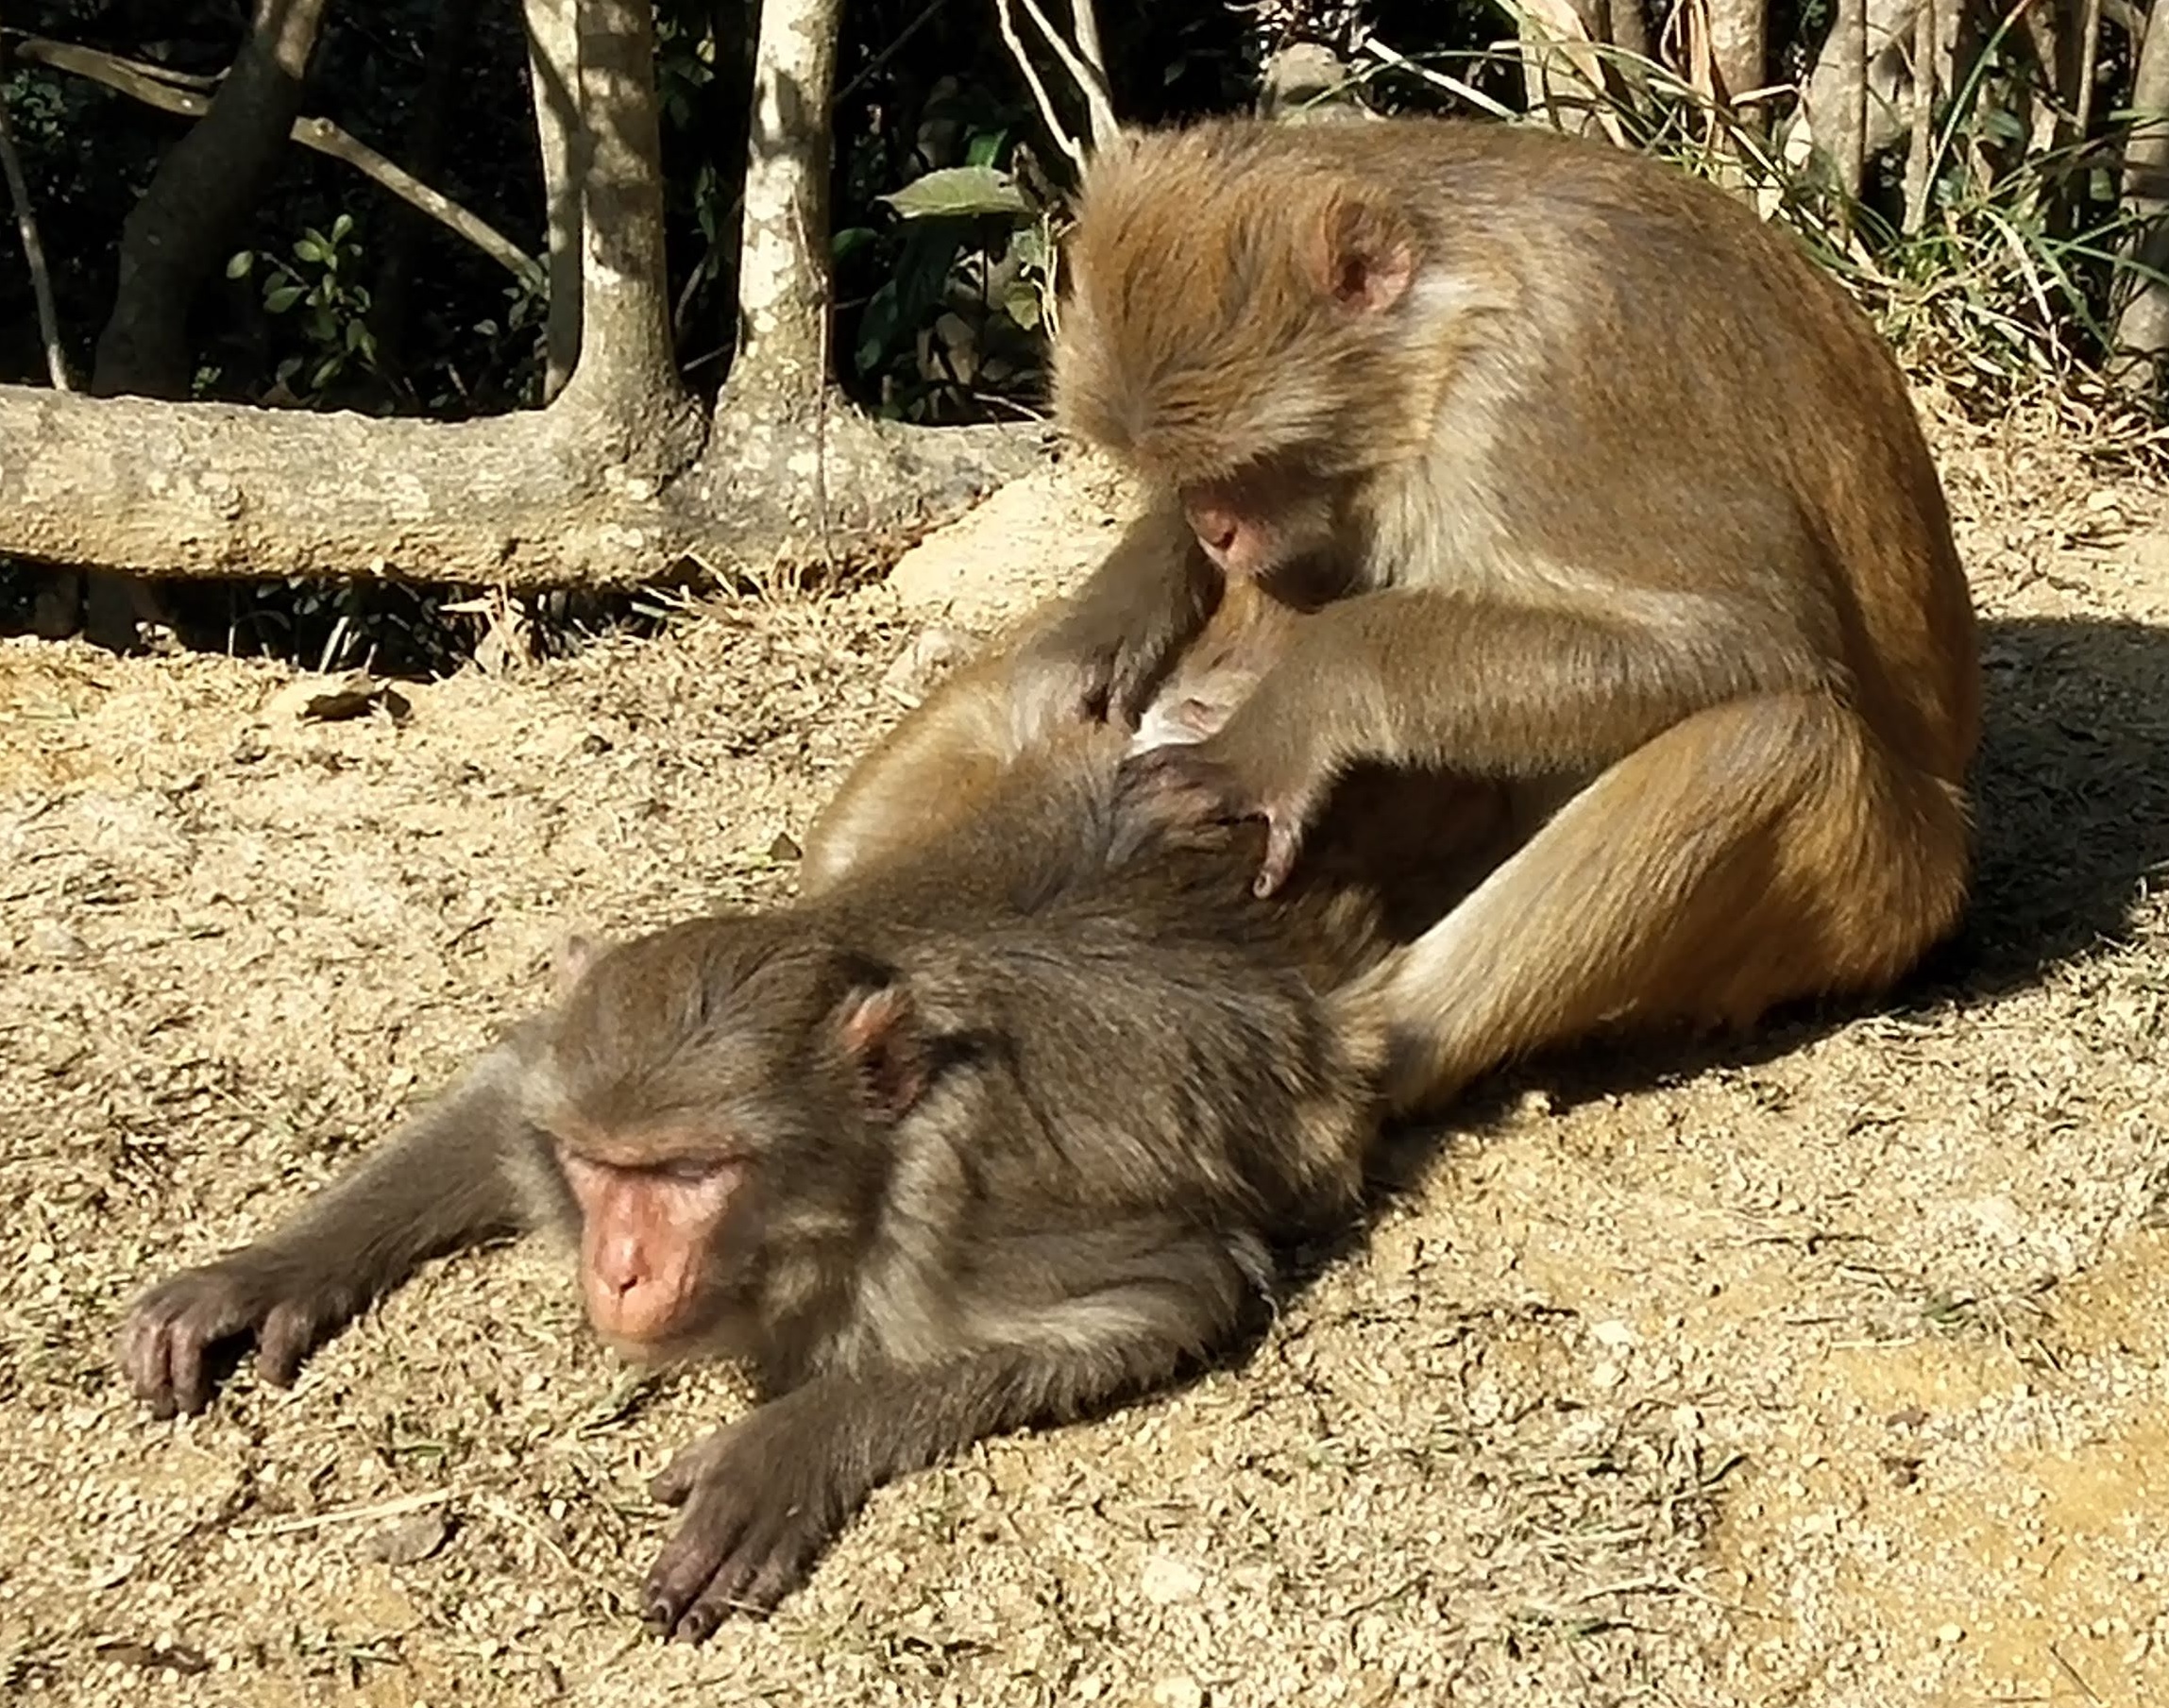 Monkey is cleaning the hair for his buddy